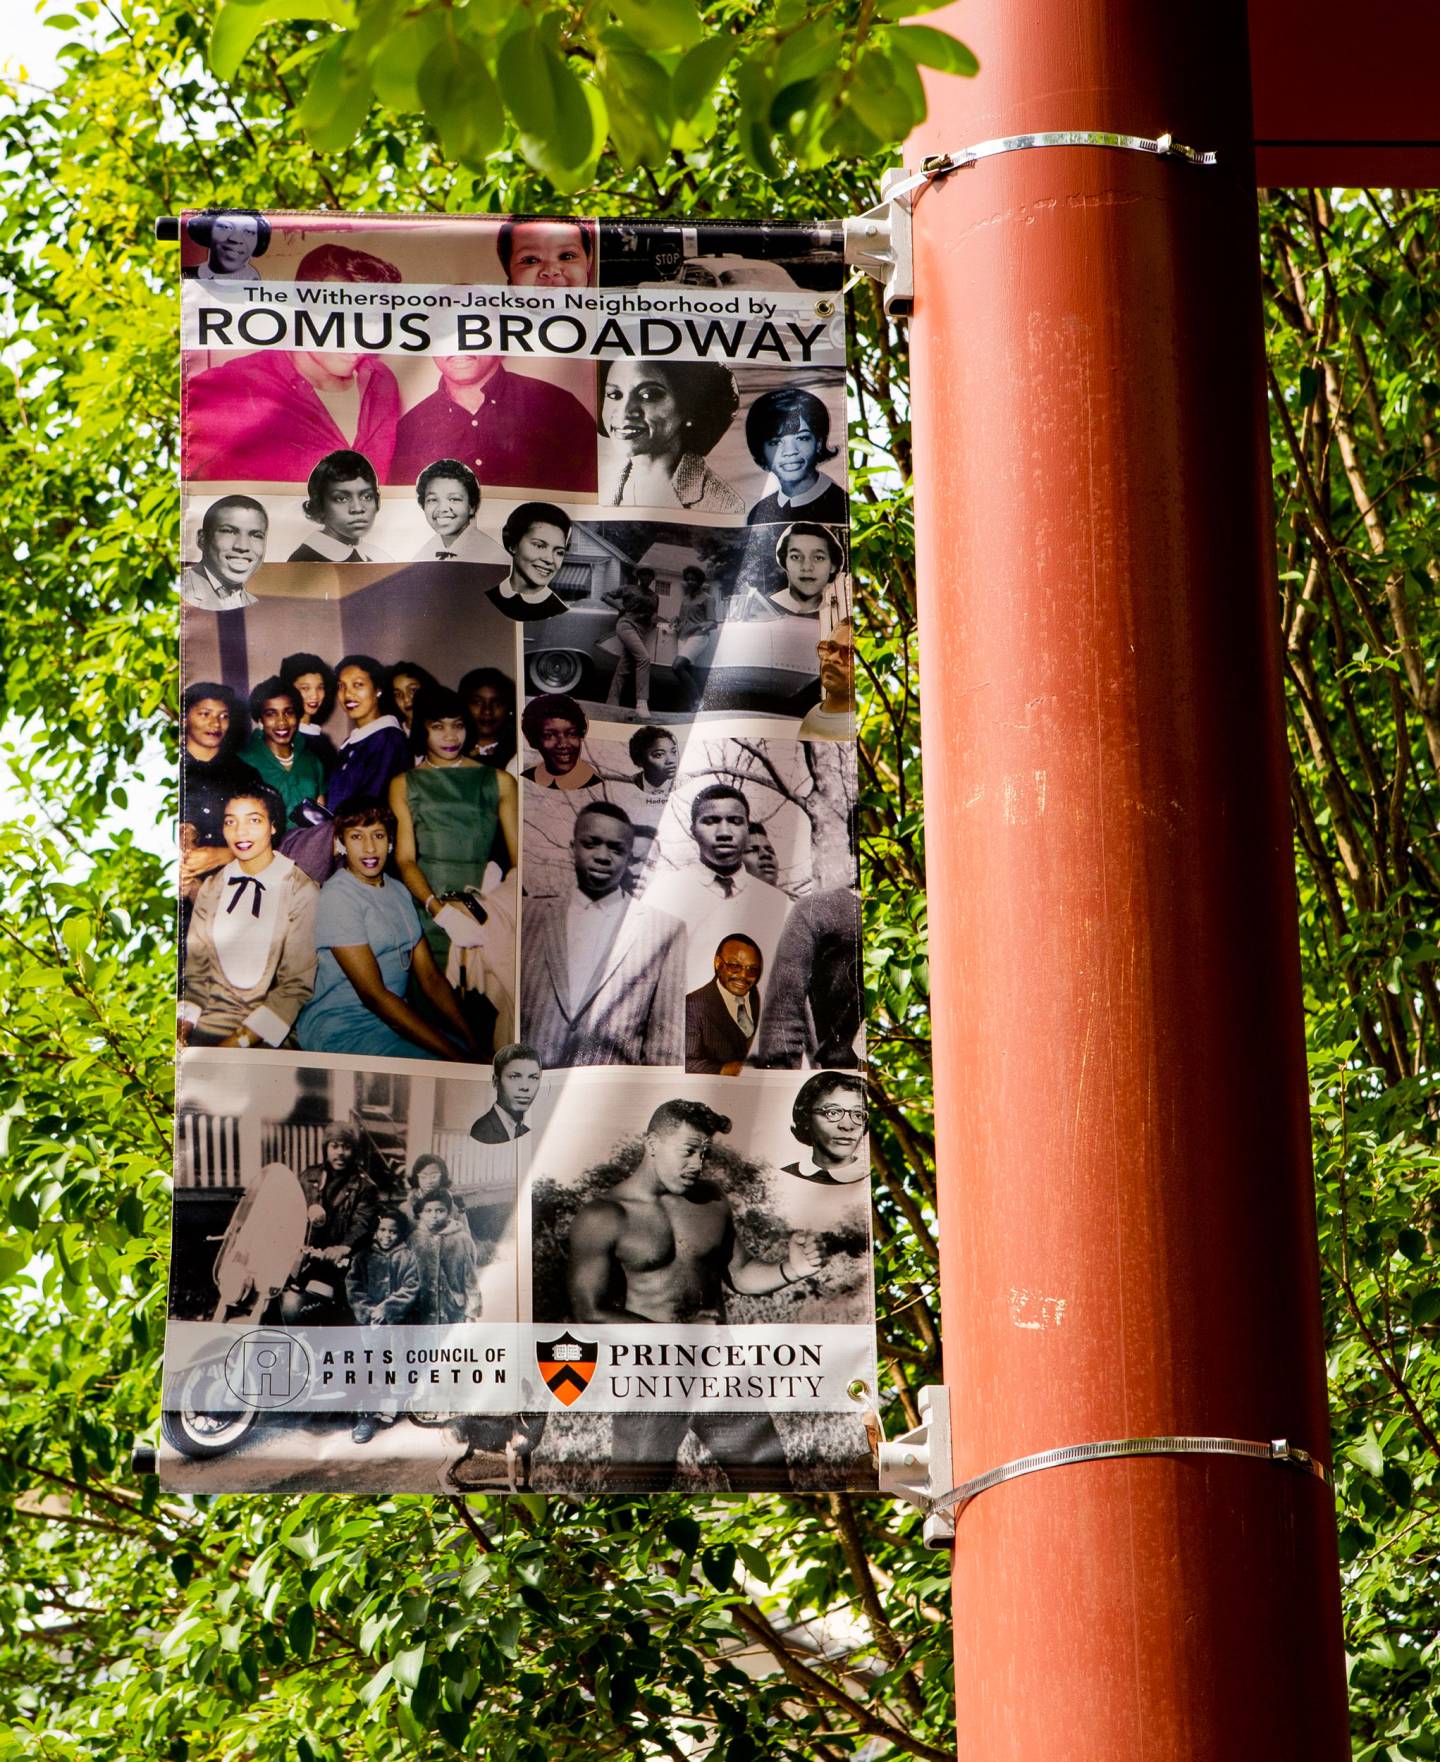 An advertising banner featuring the photographs of Romus Broadway